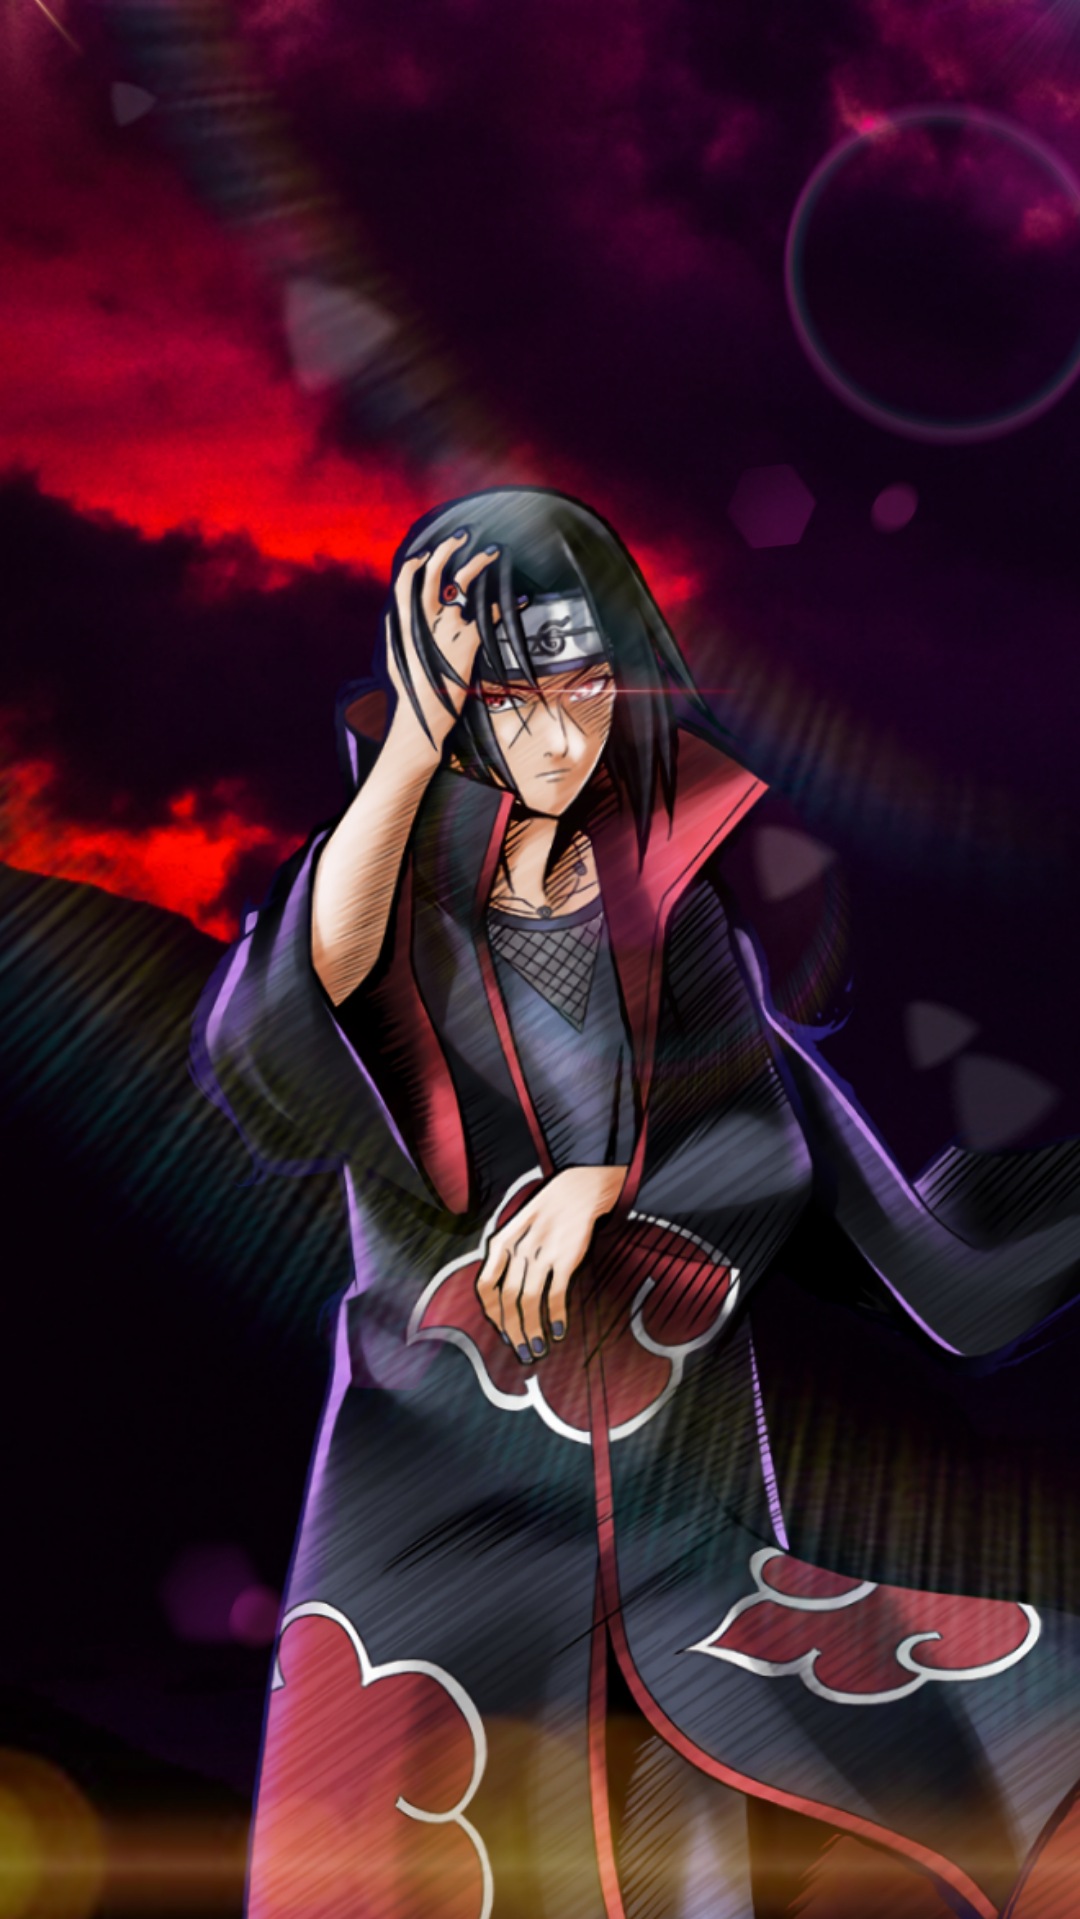 Itachi Uchiha Wallpaper : Hd Wallpaper Anime Naruto Itachi Uchiha Wallpaper Flare - Explore the 437 mobile wallpapers associated with the tag itachi uchiha and download freely everything you like!